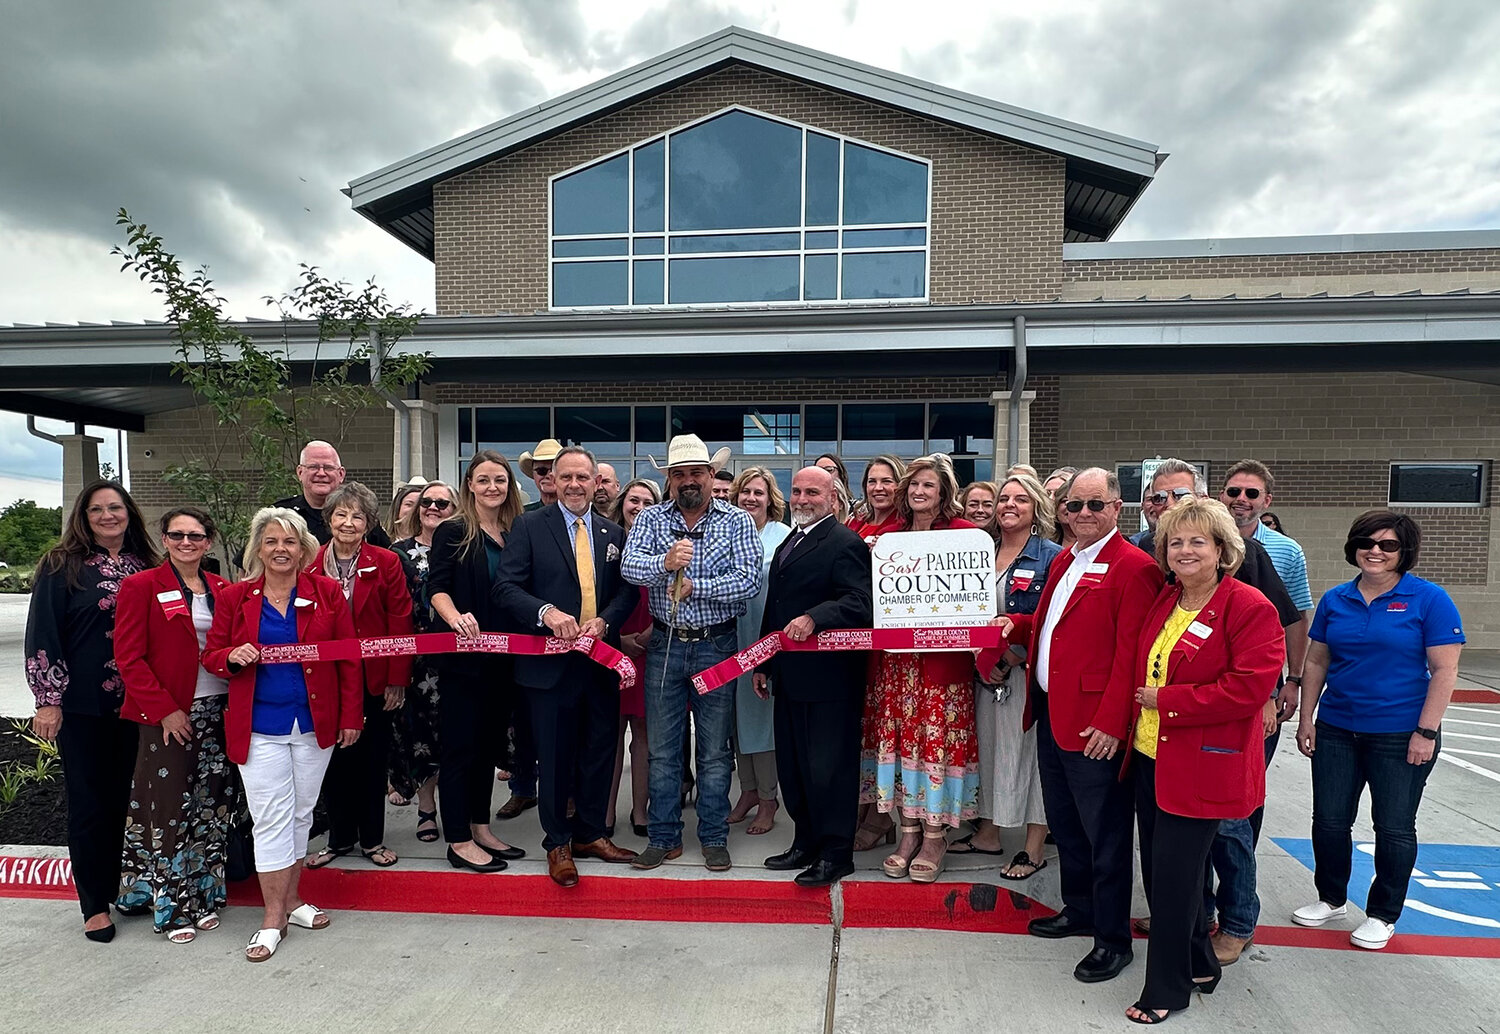 The East Parker County Chamber of Commerce held a ribbon cutting at the new East Parker County Sub Courthouse on Tuesday, May 16. County officials shown in front are (from left) Tax Assessor-Collector Jenny Gentry, County Judge Pat Deen, Pct. 4 Commissioner Mike Hale (cutting the ribbon), and Pct. 4 Justice of the Peace Tim Mendolia.